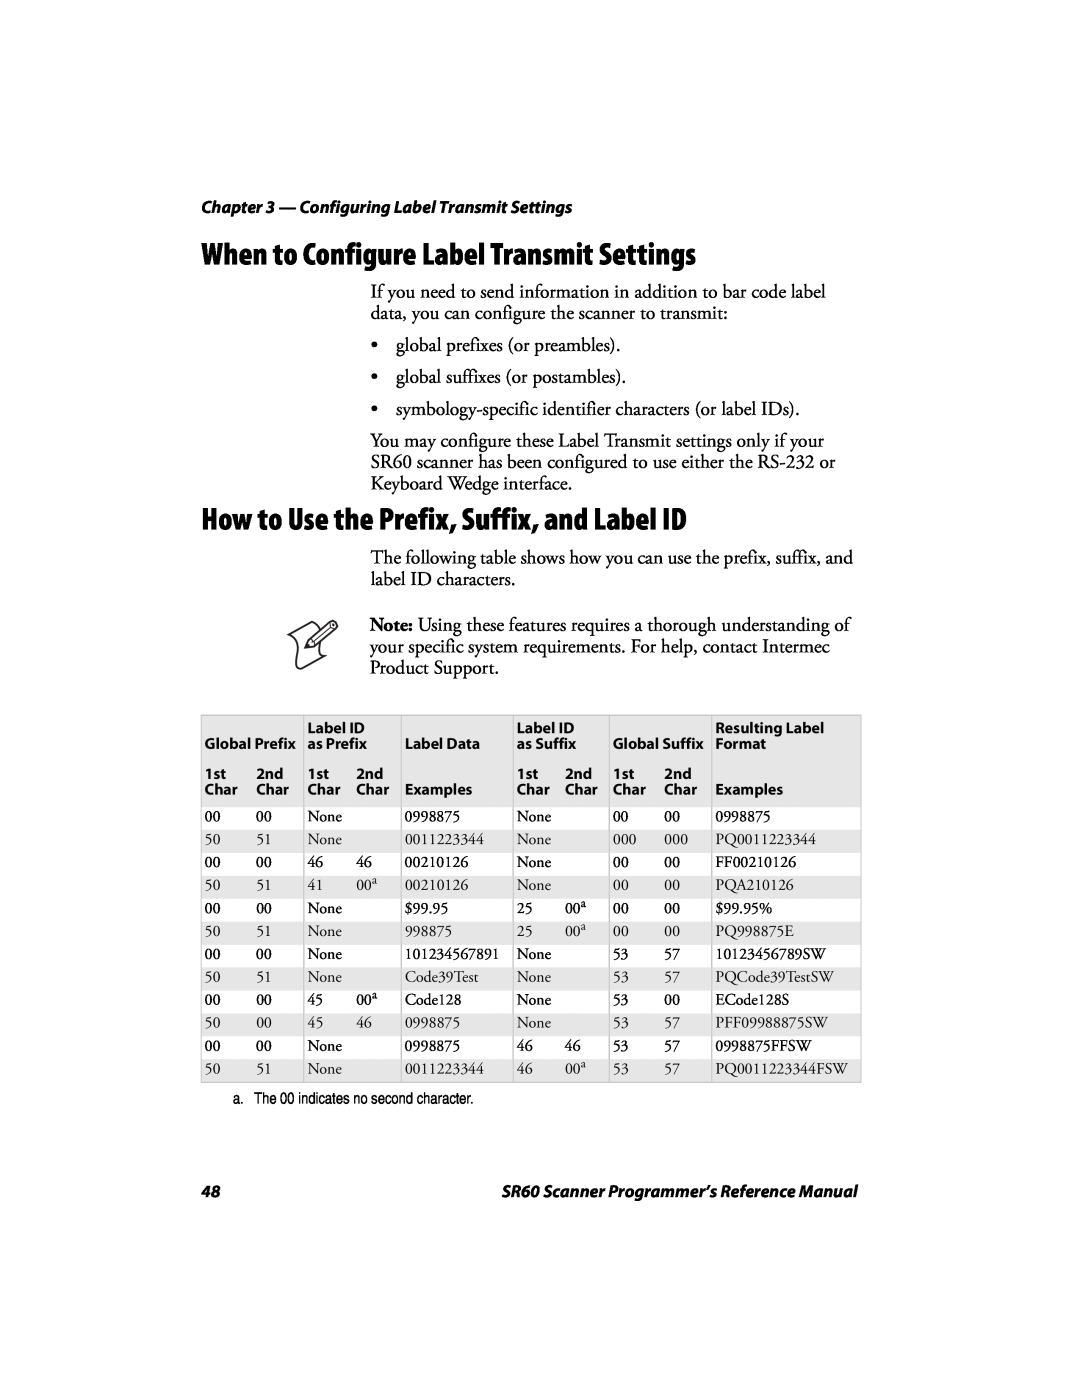 Intermec SR60 manual When to Configure Label Transmit Settings, How to Use the Prefix, Suffix, and Label ID 